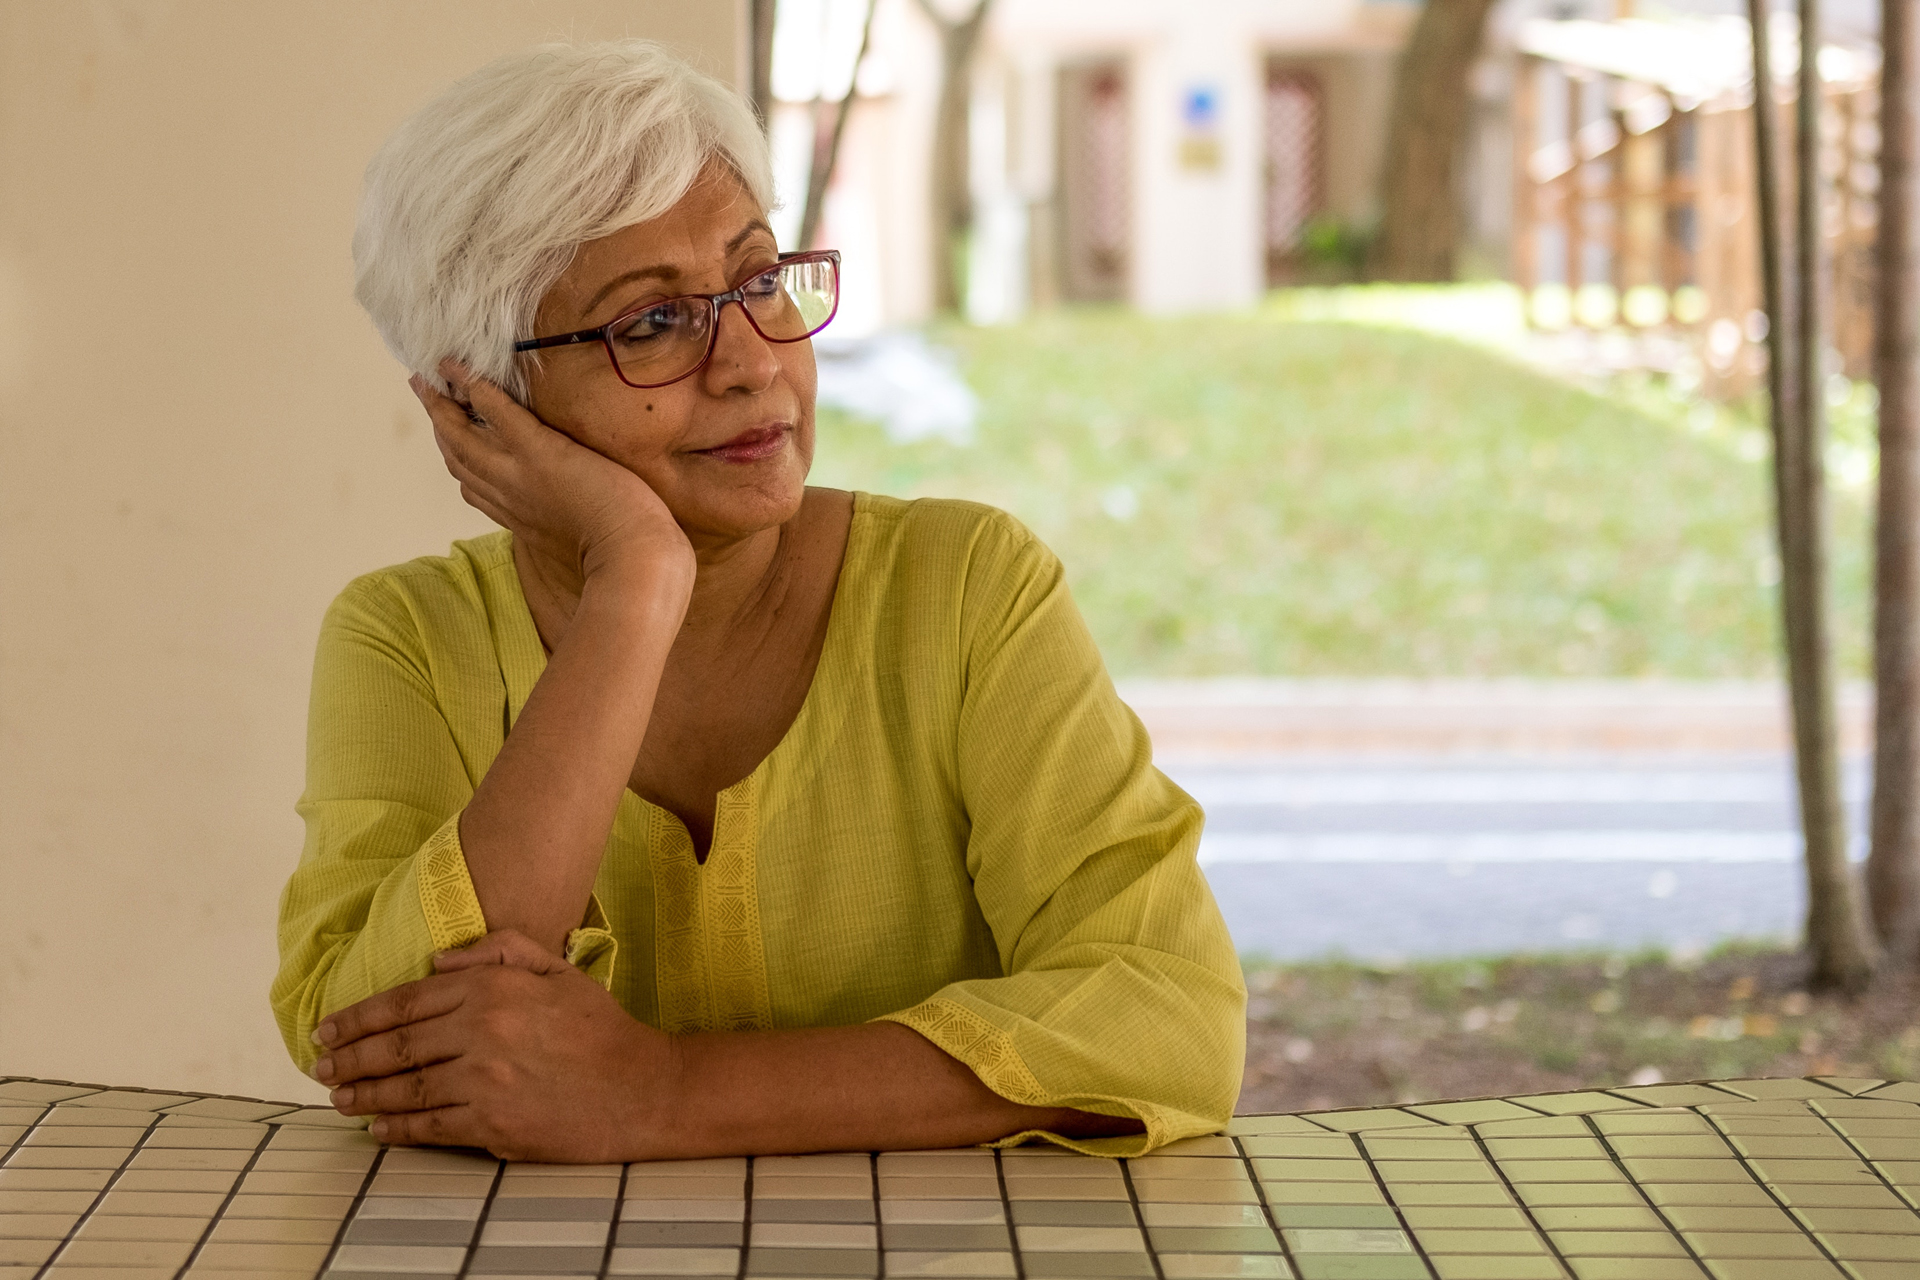 Elderly woman thoughtfully considering her retirement planning and debt-free future, highlighting the financial guidance and support from Money Mentors.